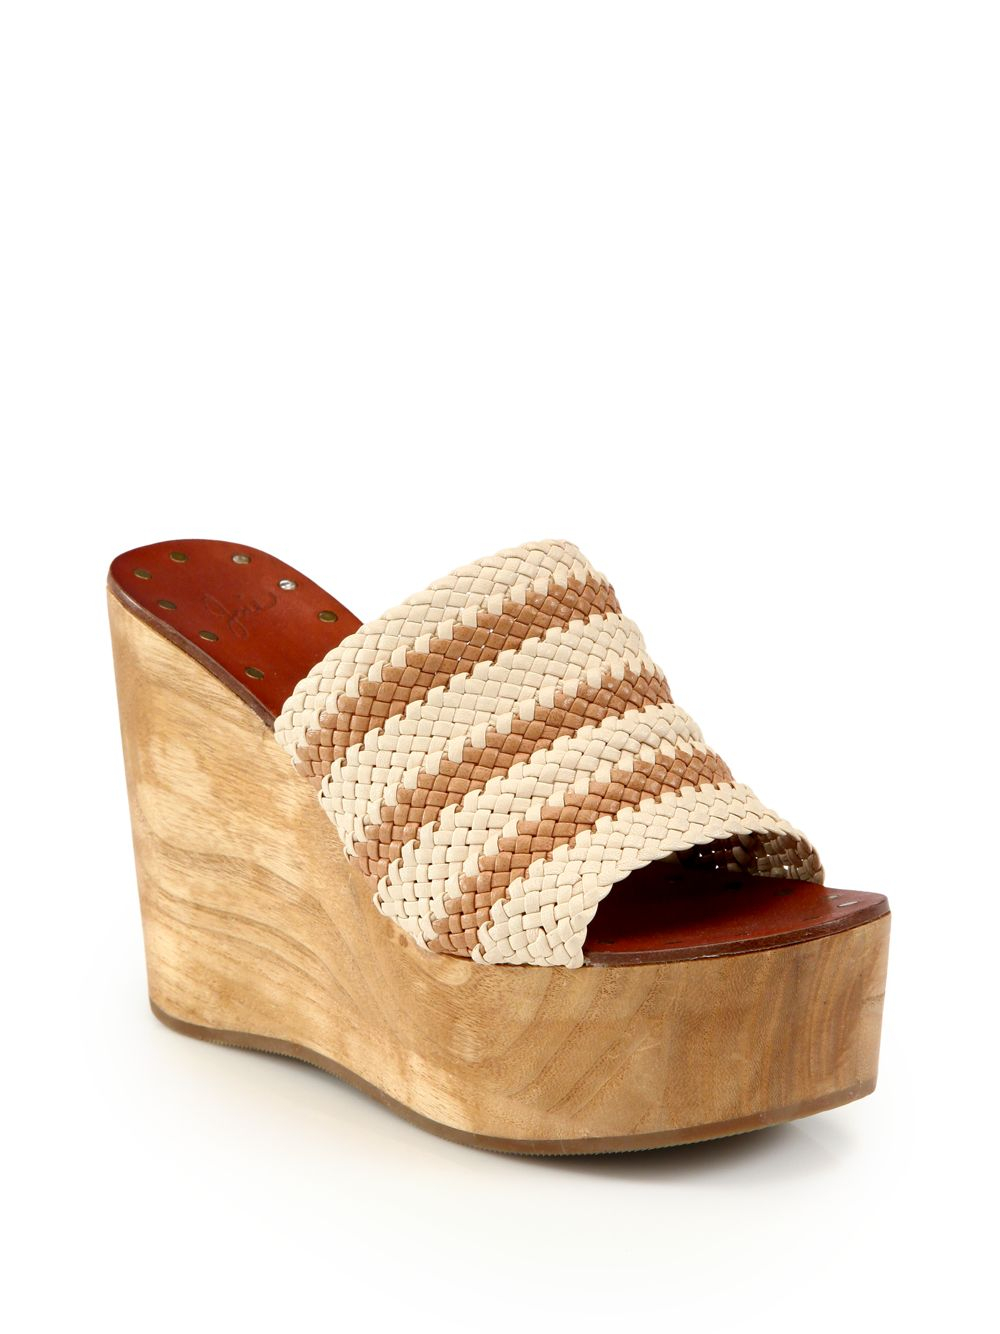 Joie Woven Leather Wood Platform Wedge Sandals in Multicolor (blush) | Lyst